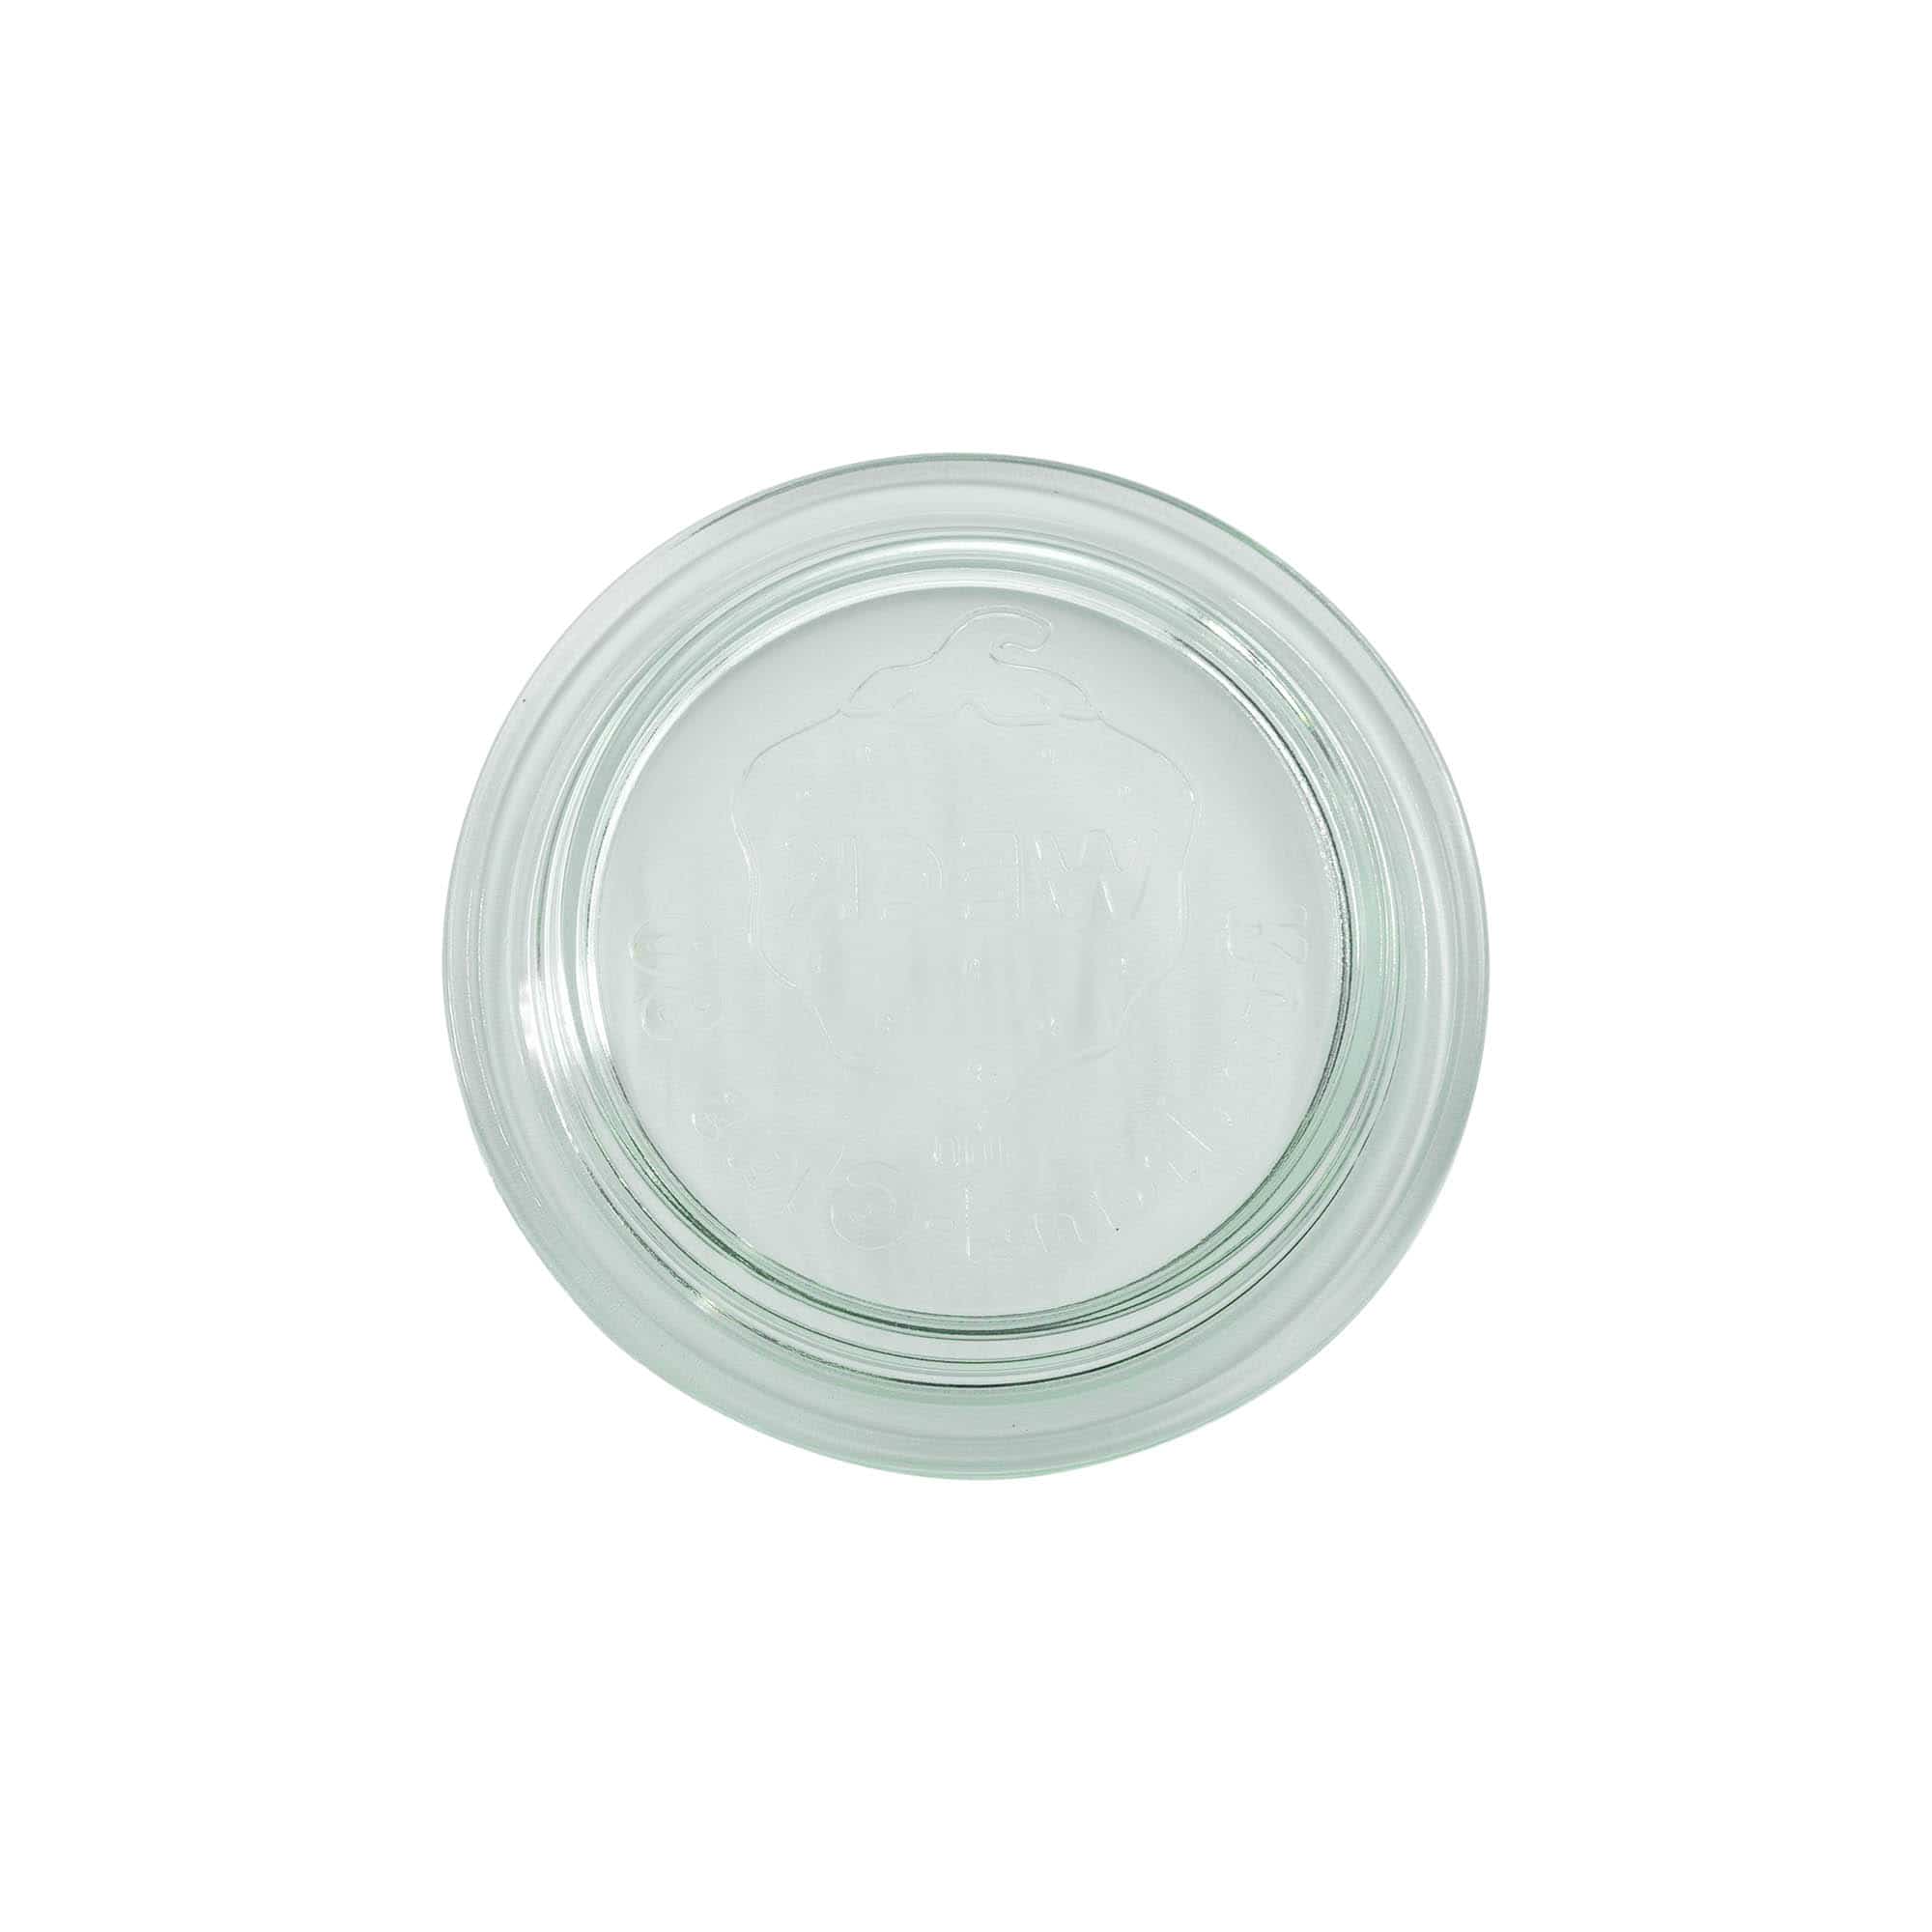 Lid for WECK round rim jar, for opening: RR80